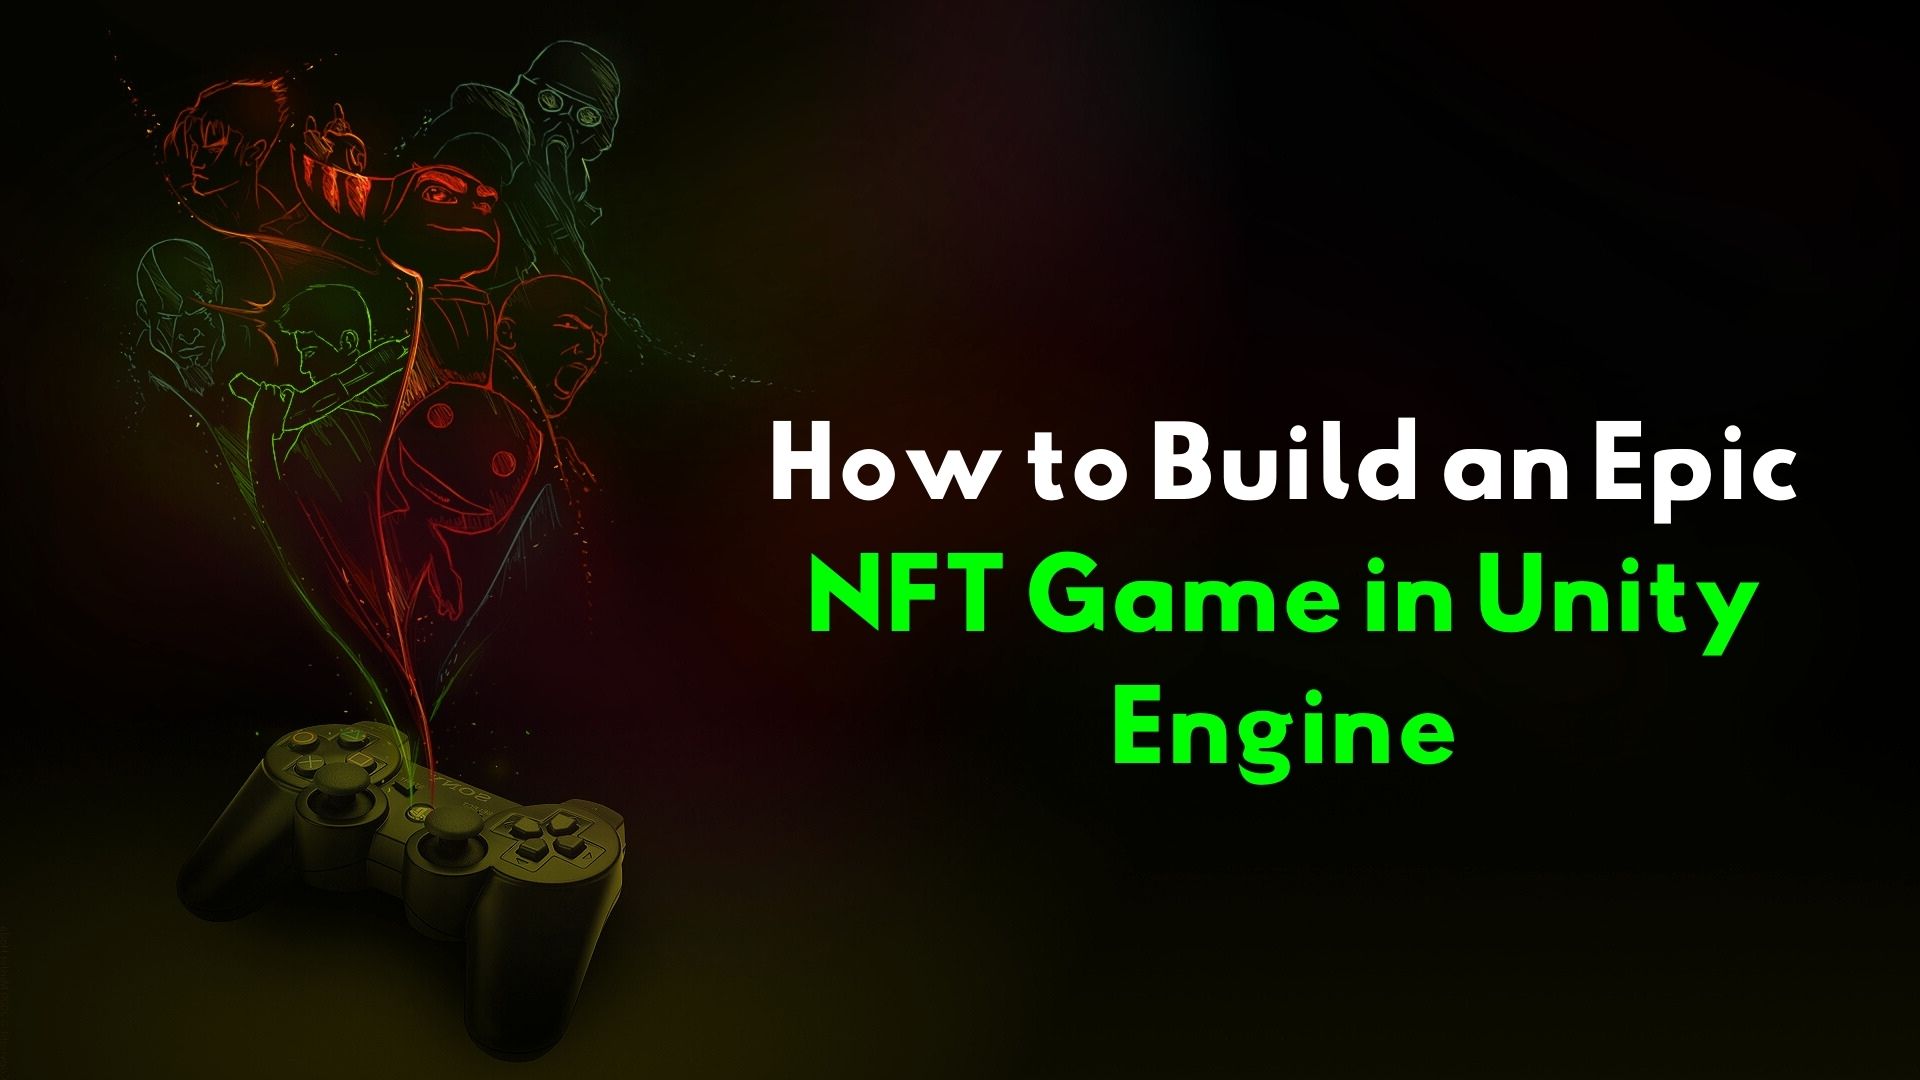 How to Build an Epic NFT Game in Unity Engine